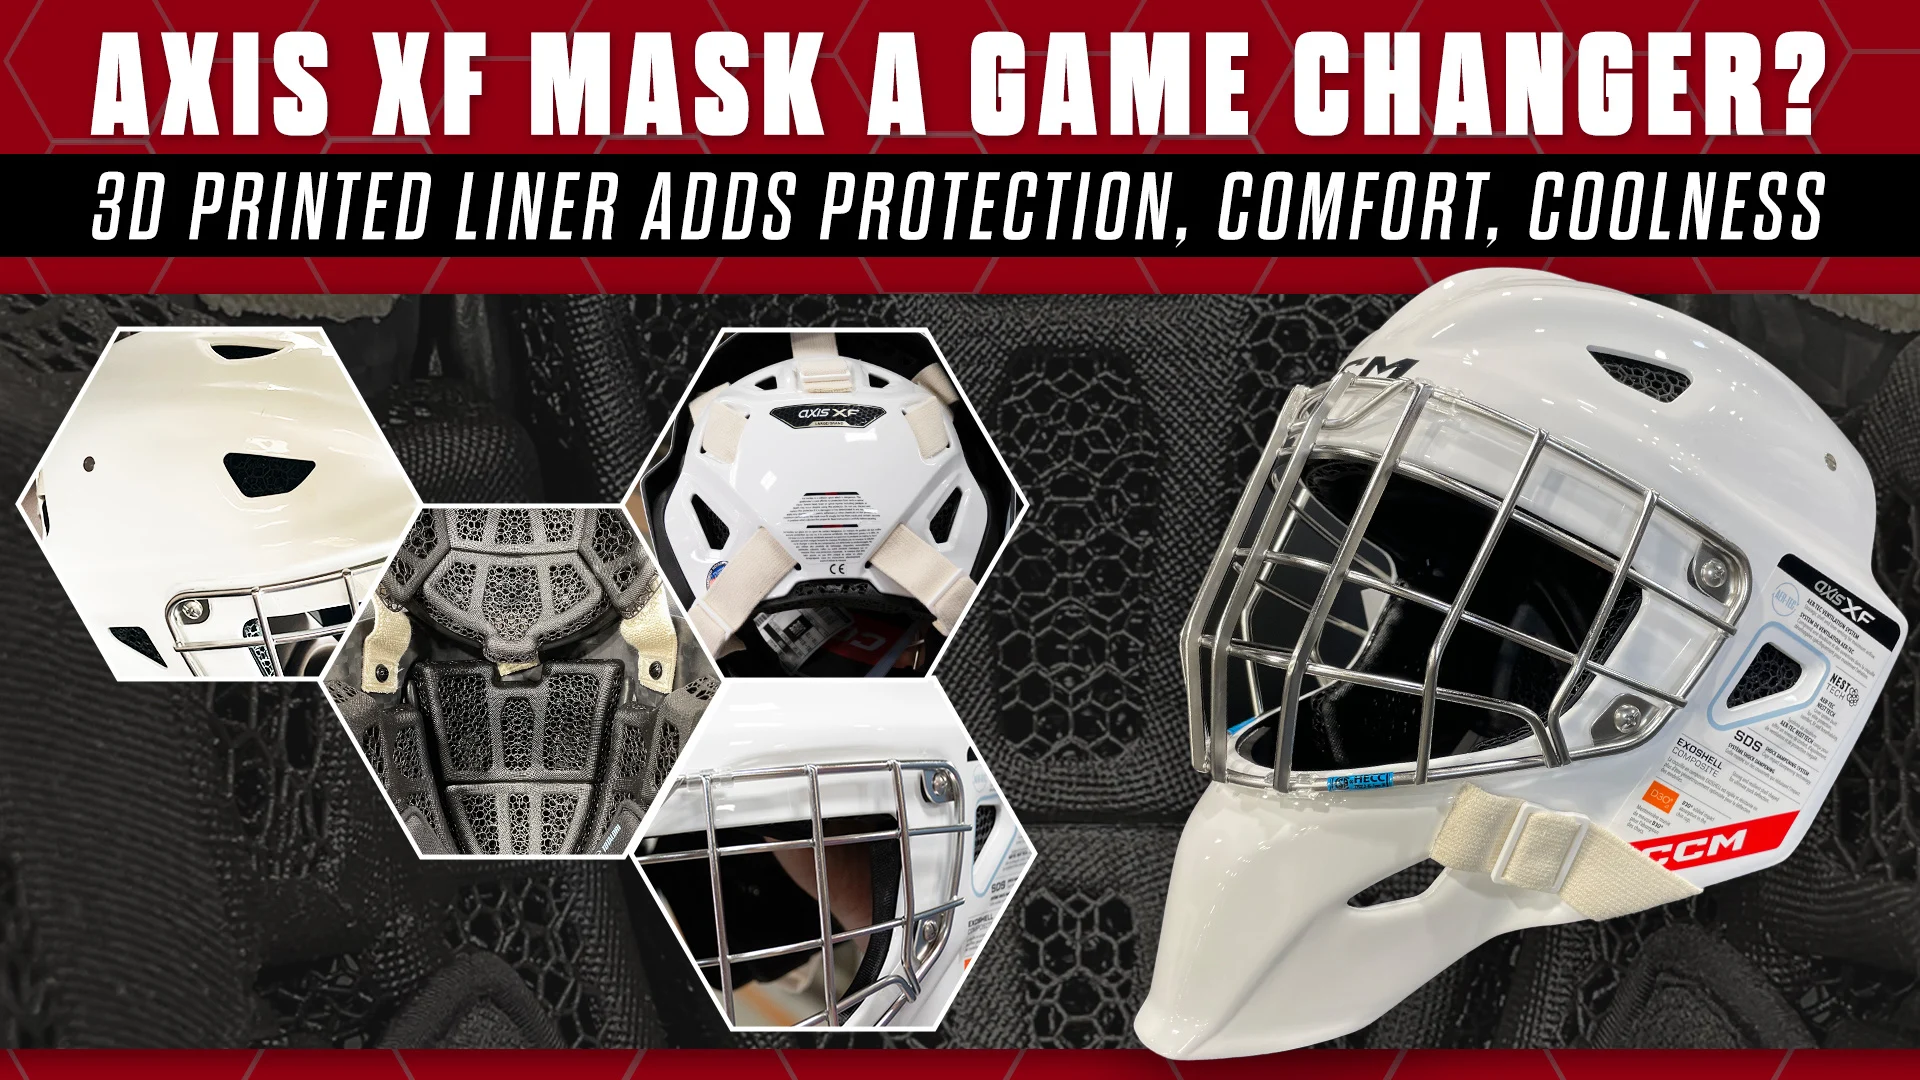 AXIS XF Mask a Game Changer?